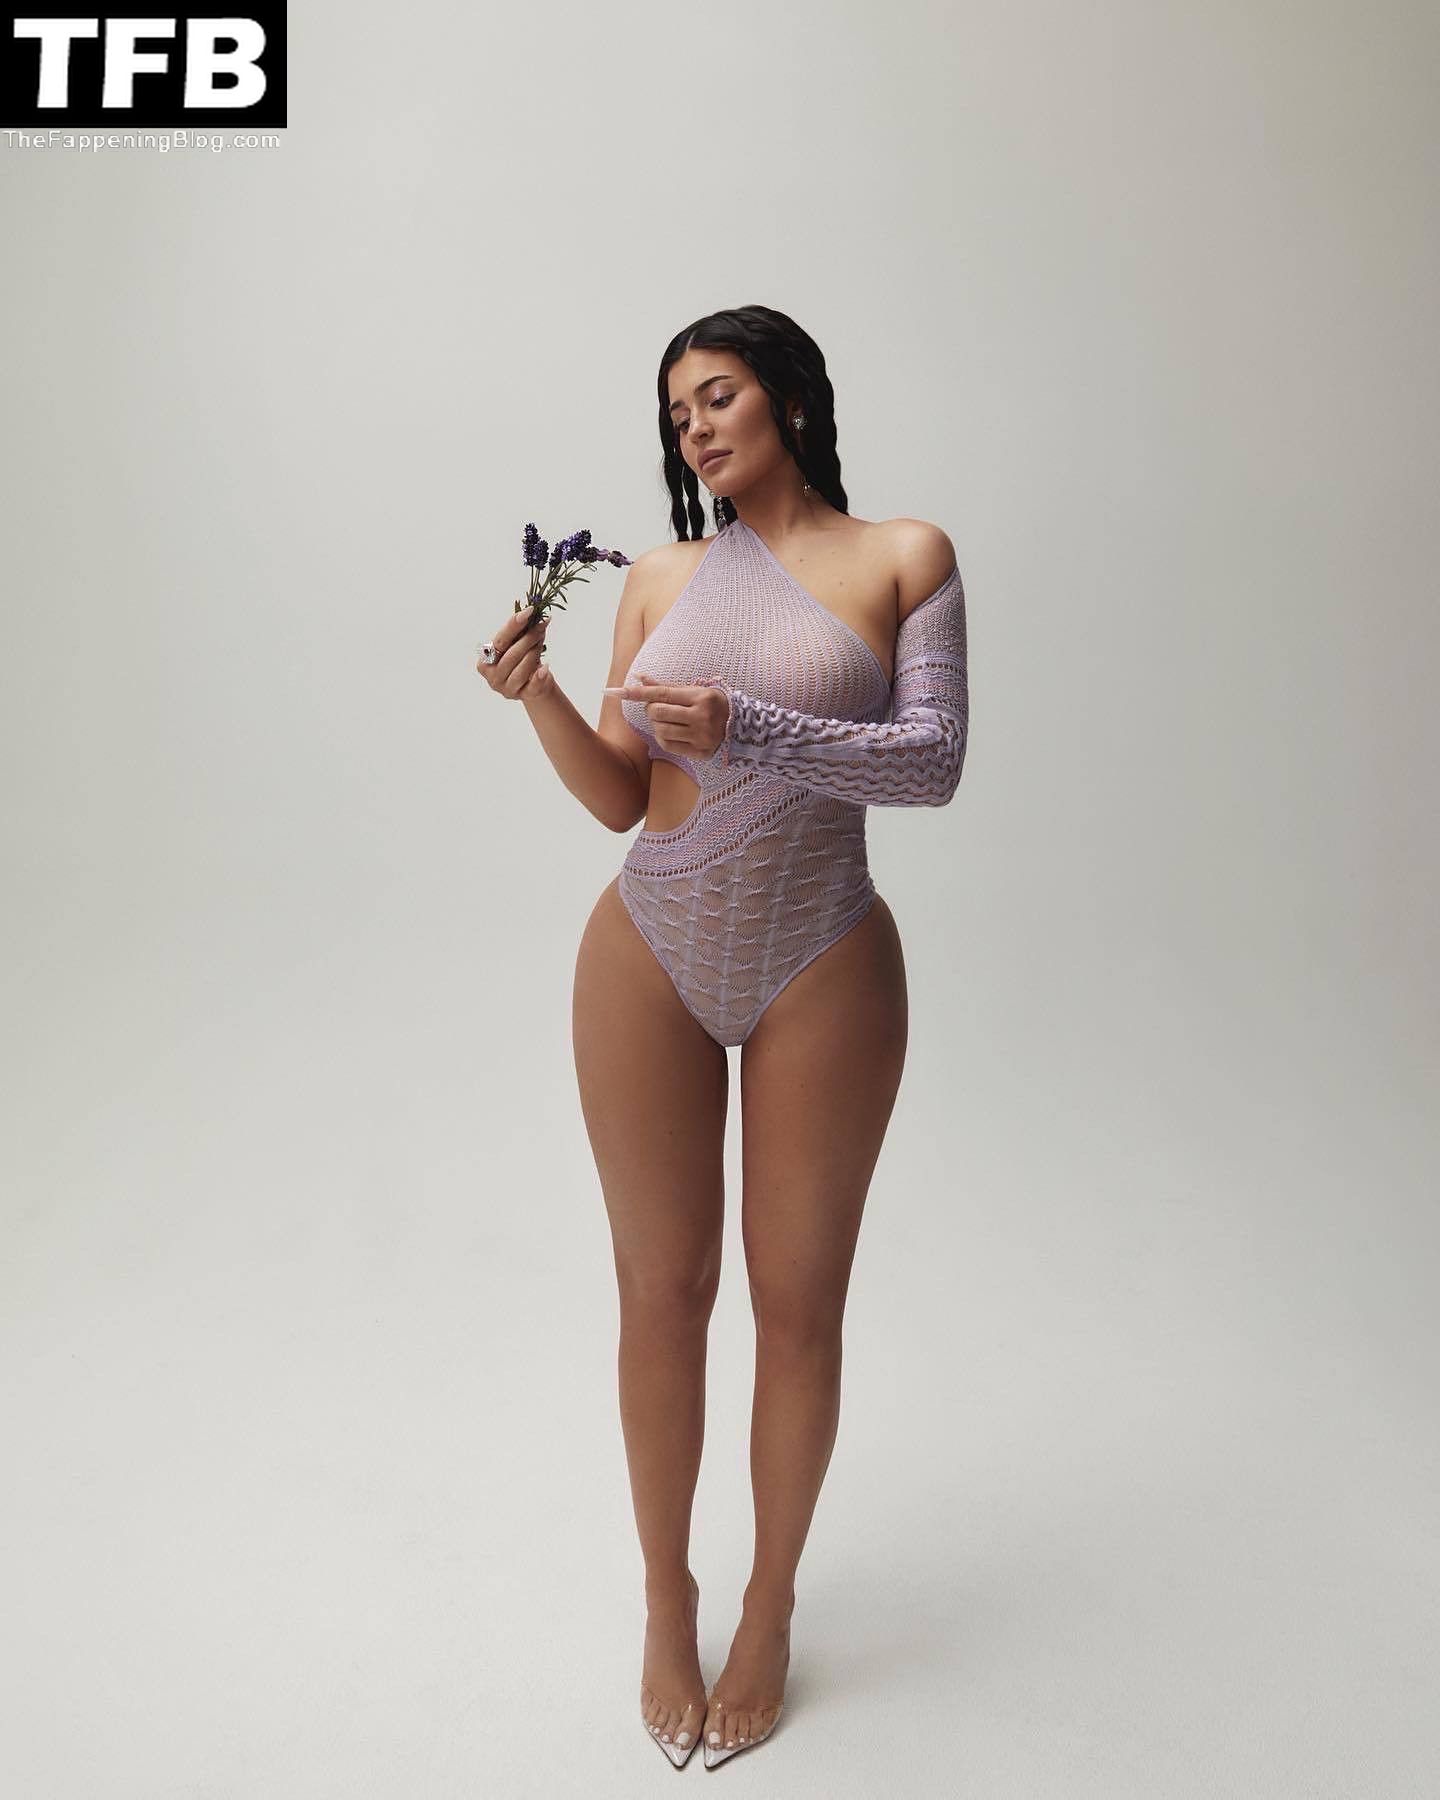 kylie jenner see through 54481 thefappeningblog.com  - Kylie Jenner Sexy (13 Hot Photos)